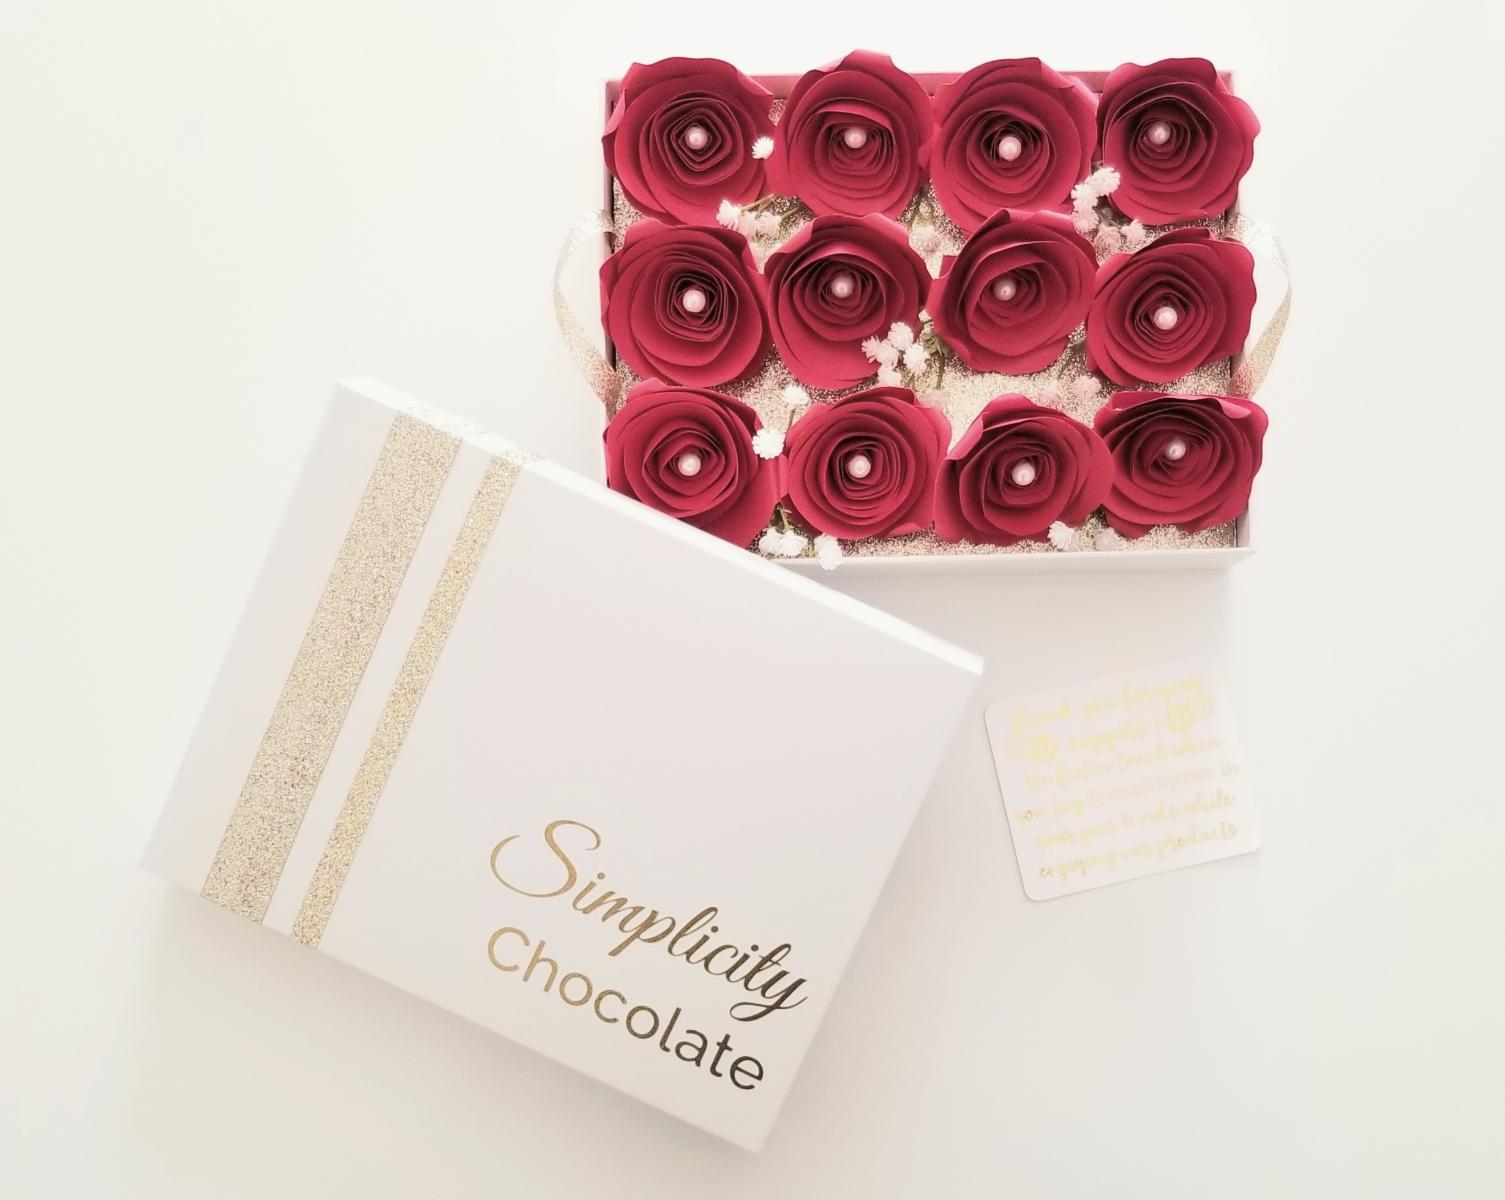 The lid of The Simplicity Chocolate Nostalgia Box with gold accents and the signature logo in gold writing is pictured next to a full view of the one dozen red, paper roses sitting atop the removable tray inside the box.